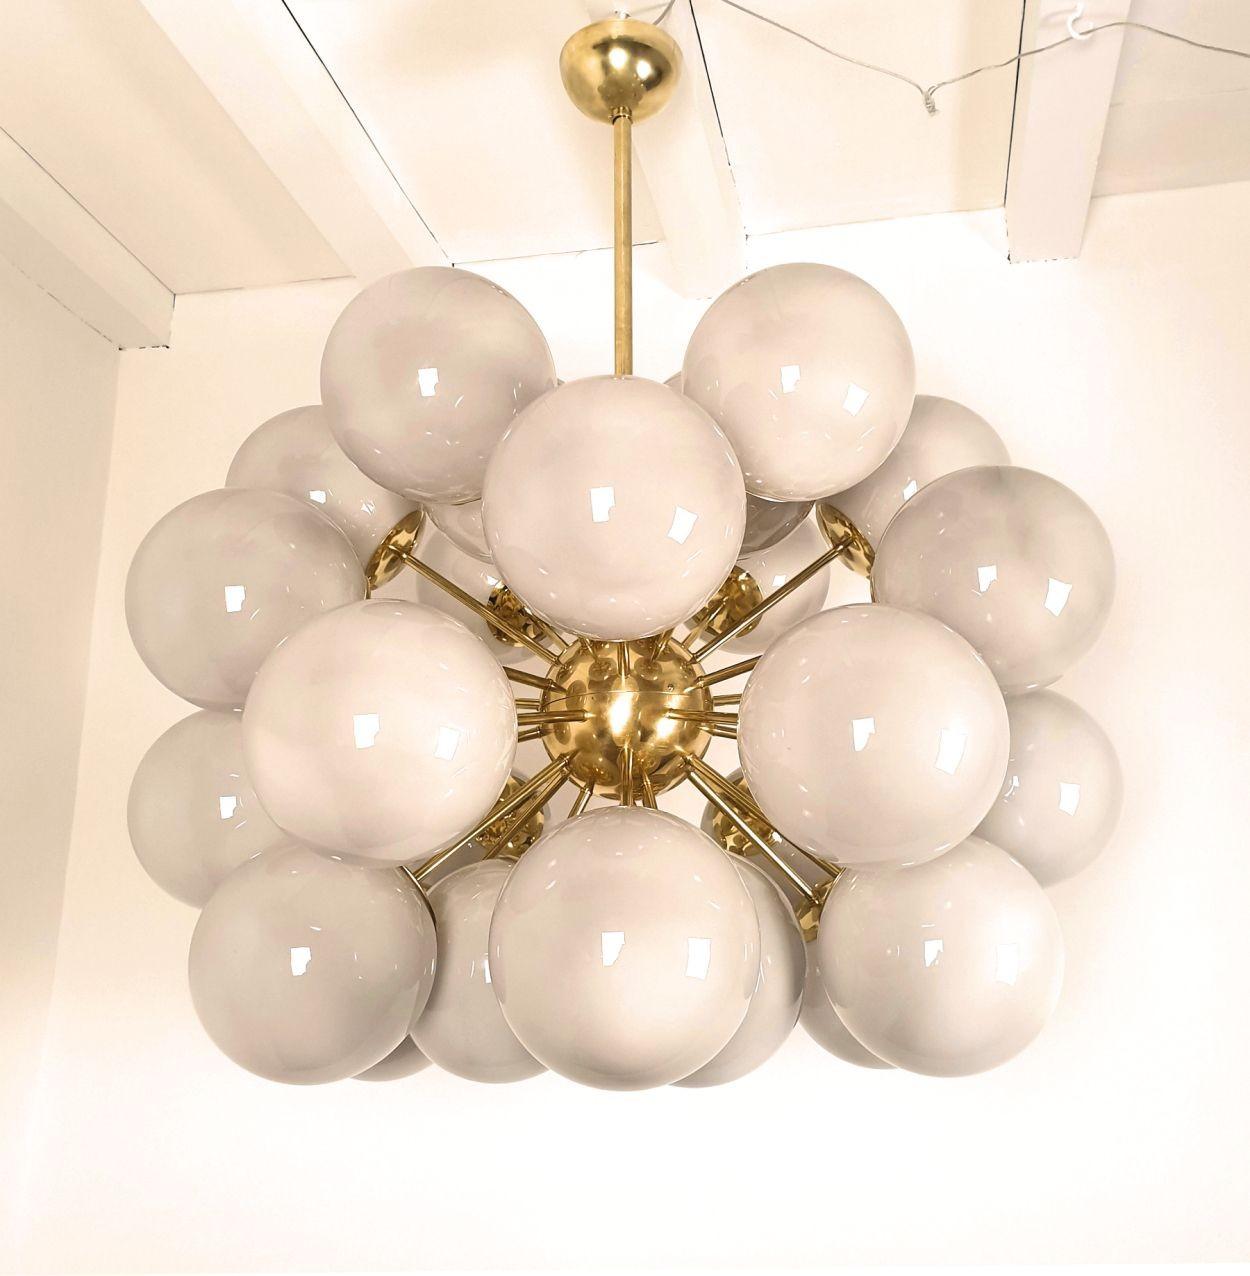 Very large Mid Century Modern light gray Murano globes Sputnik chandelier, Italy circa 1990s.
The huge vintage chandelier is made of brass mounts and 30 Murano glass globes, each nesting one light.
The glasses are translucent, in a light warm gray